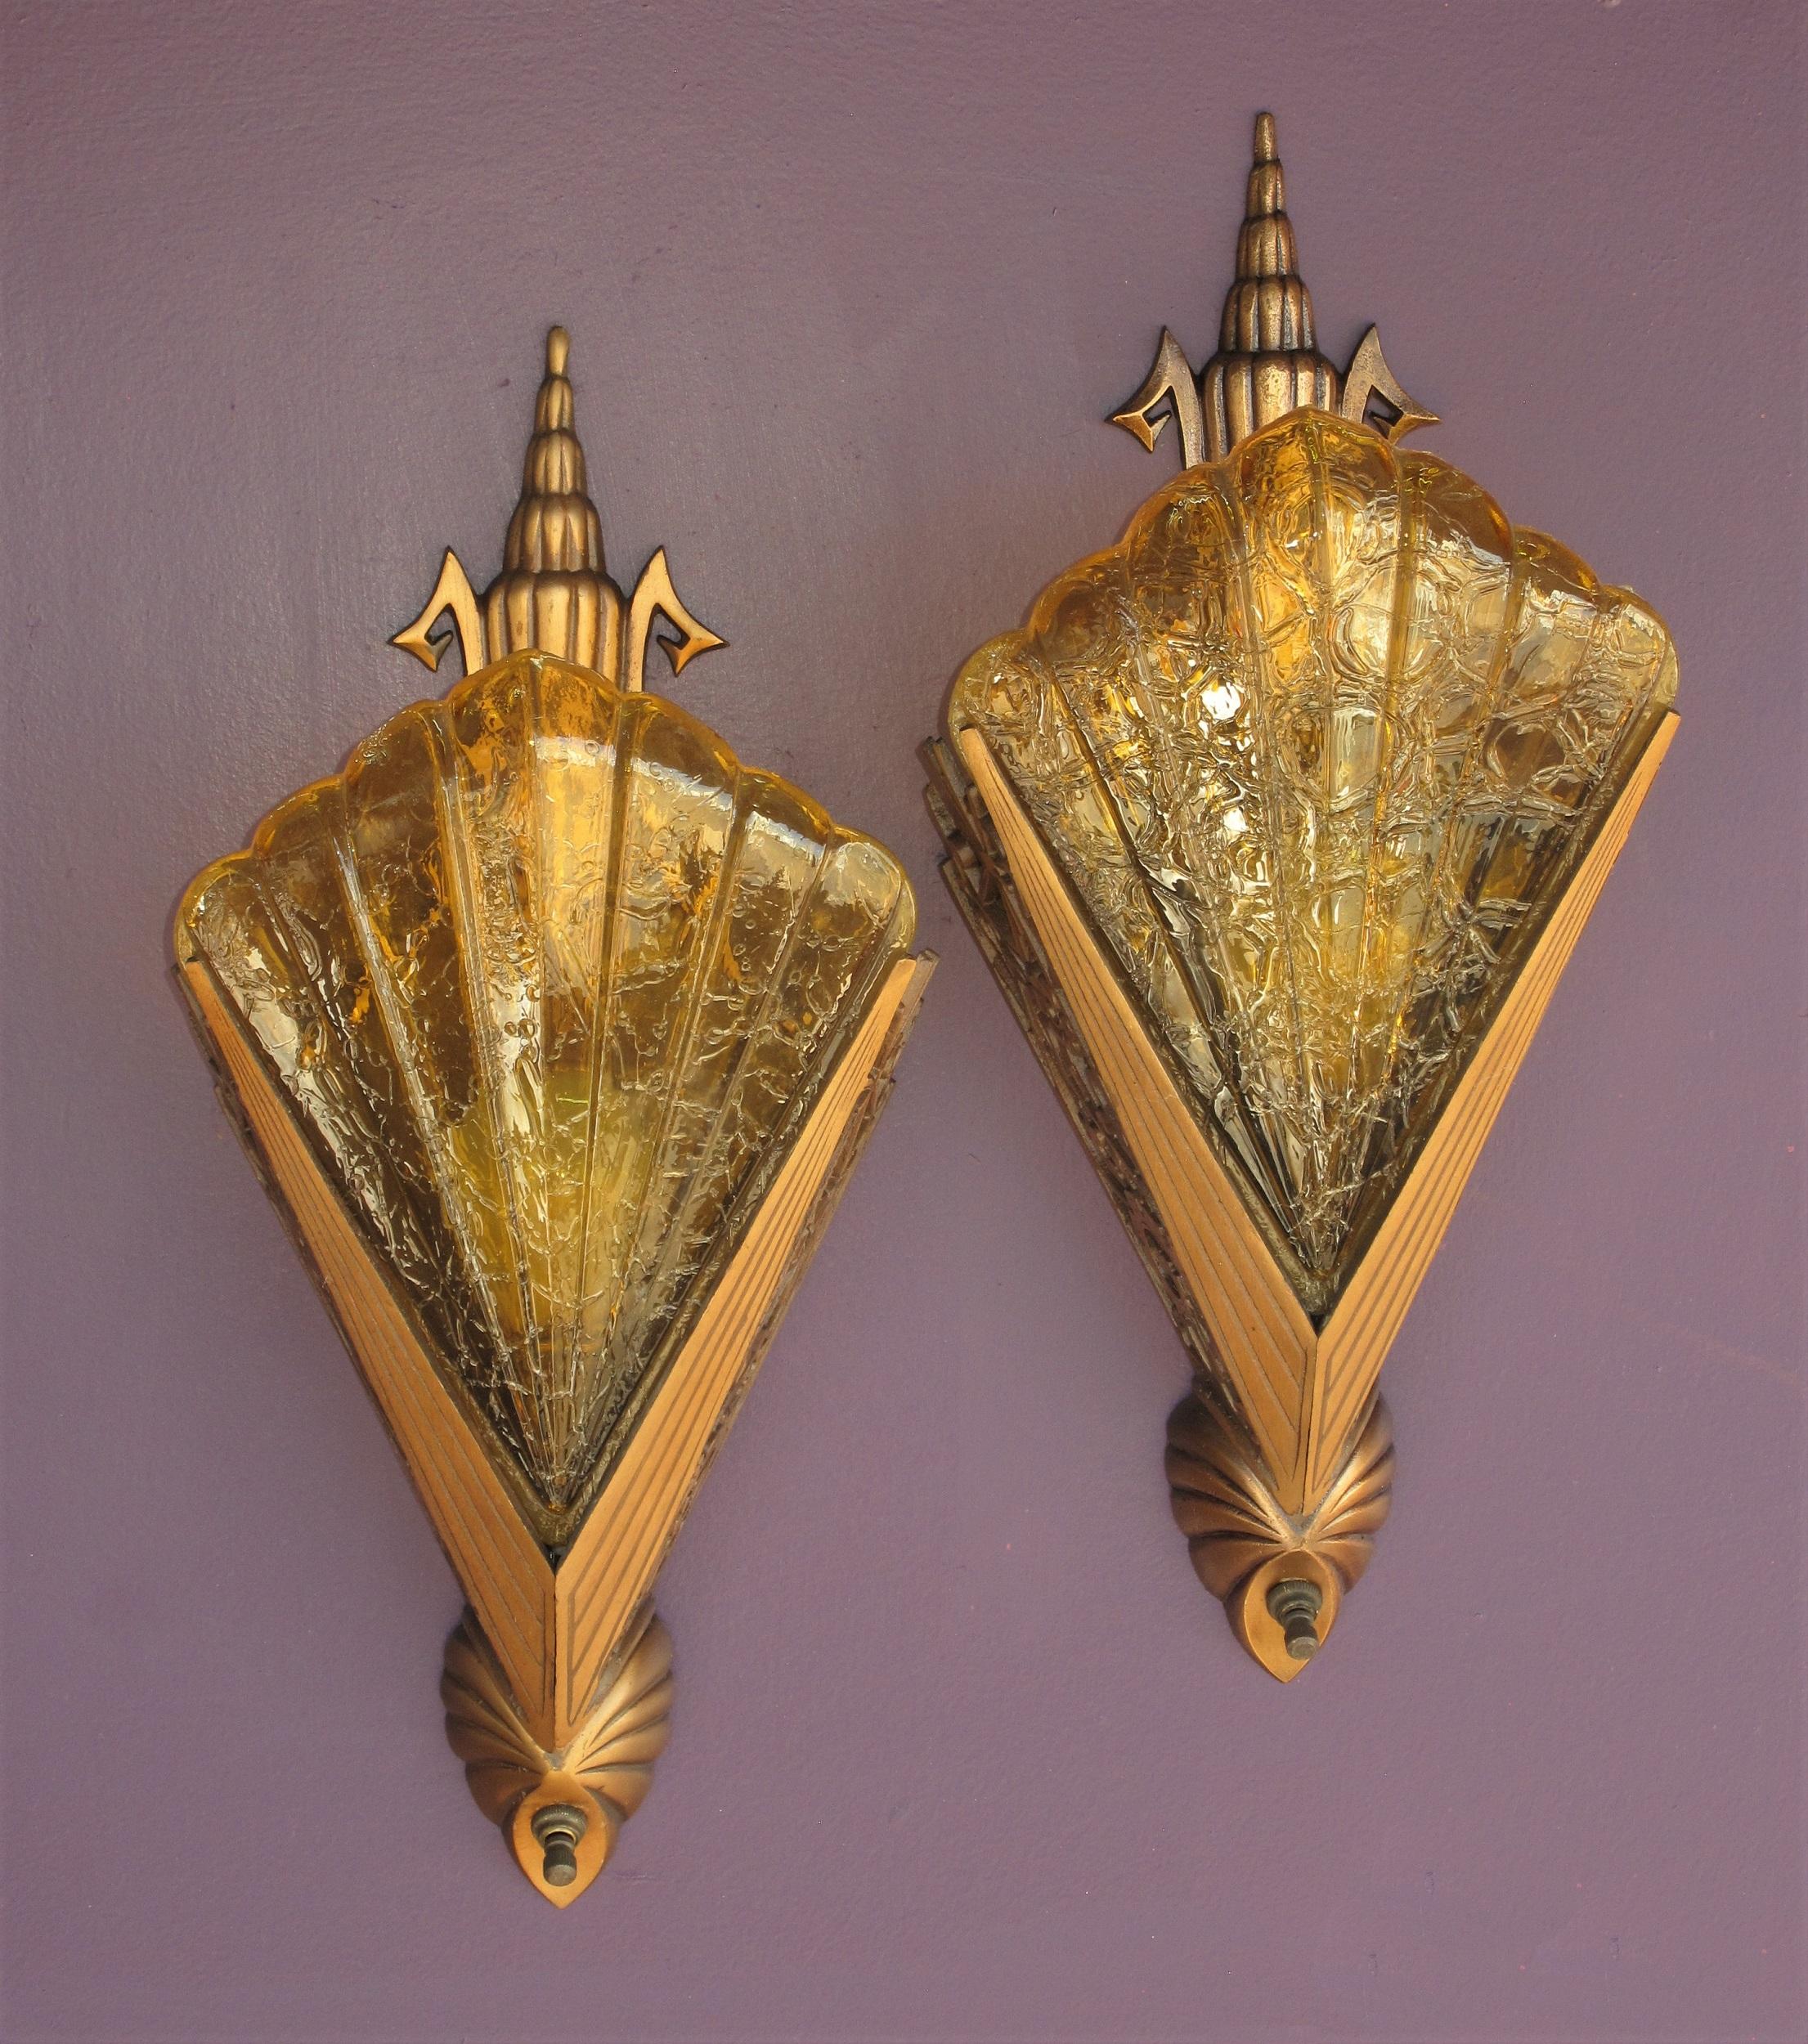 Patinated Ultra Deco 30s Pr Bronze Slip Shade Sconces w/ Honey colored shades priced pair For Sale